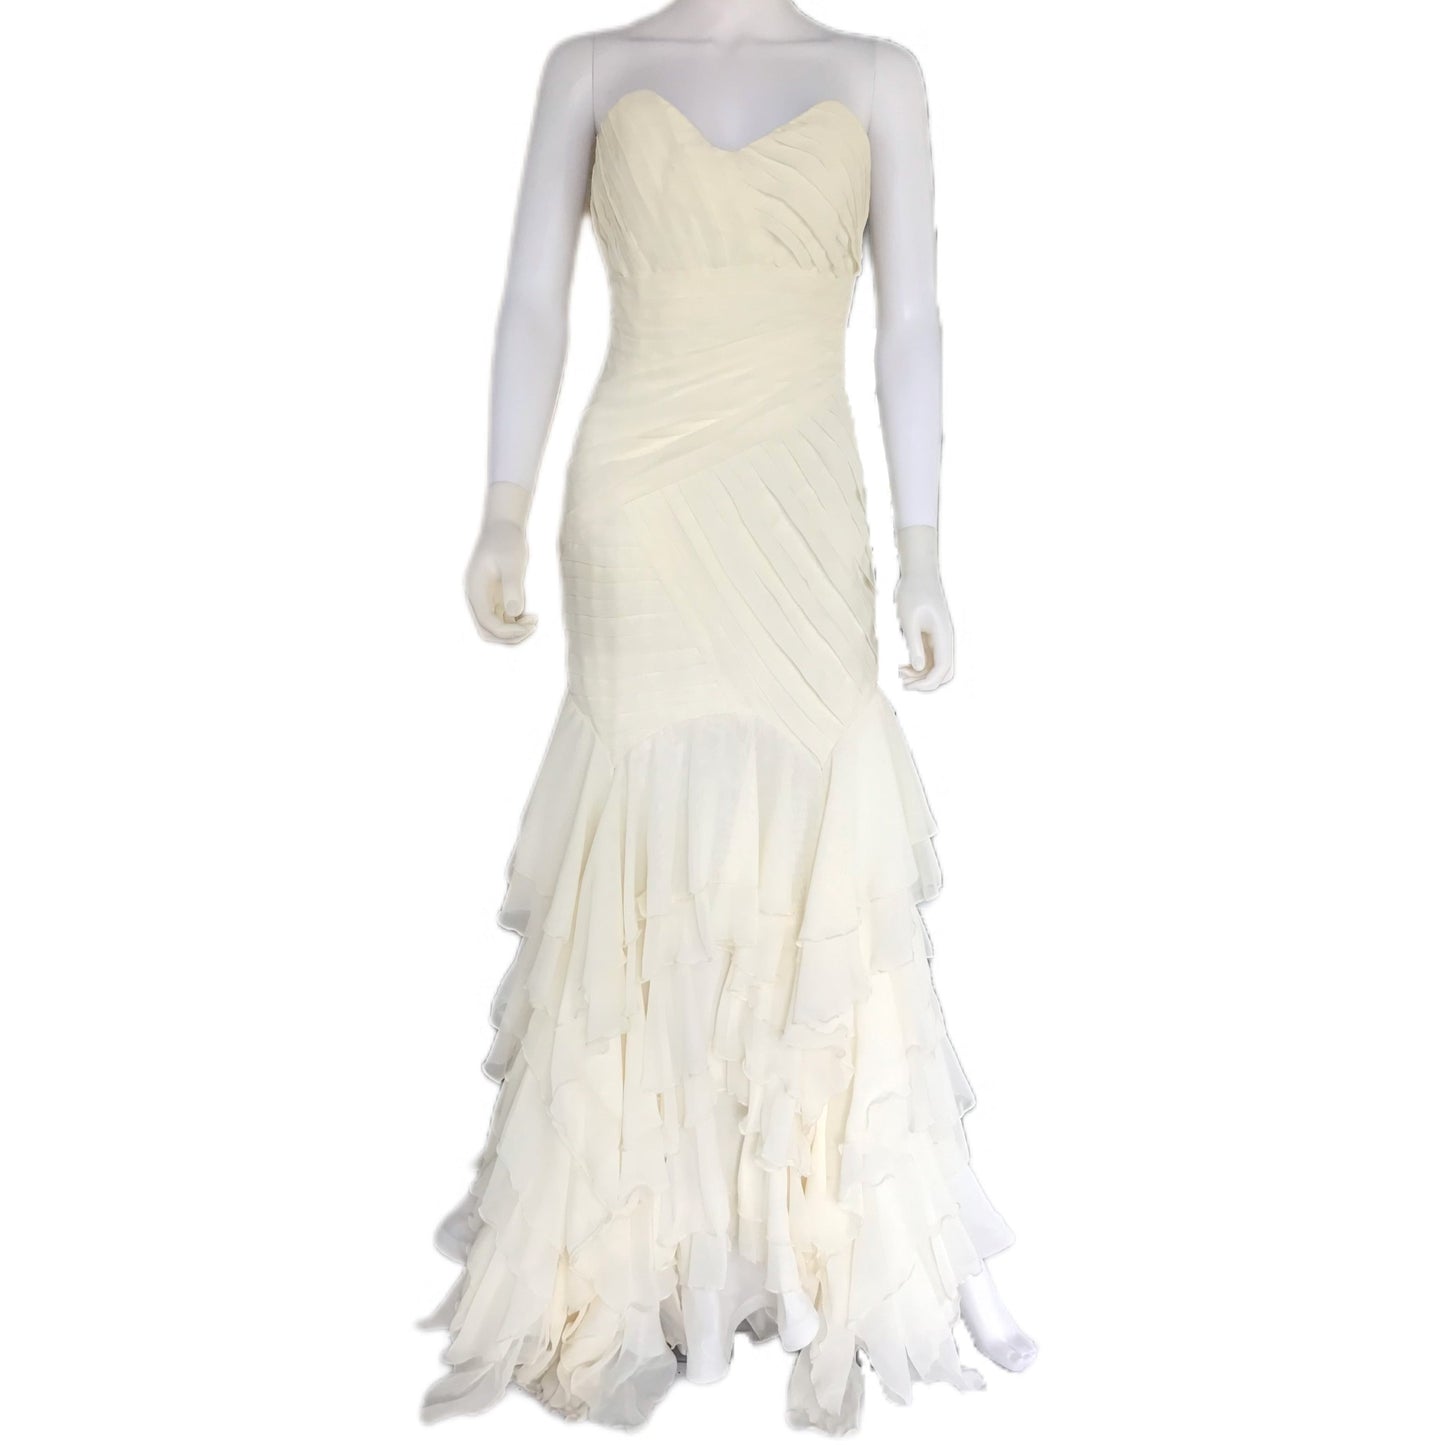 The Madonna Lily Women's Chiffon Wedding Dress - Made to Measure - Ivory or White